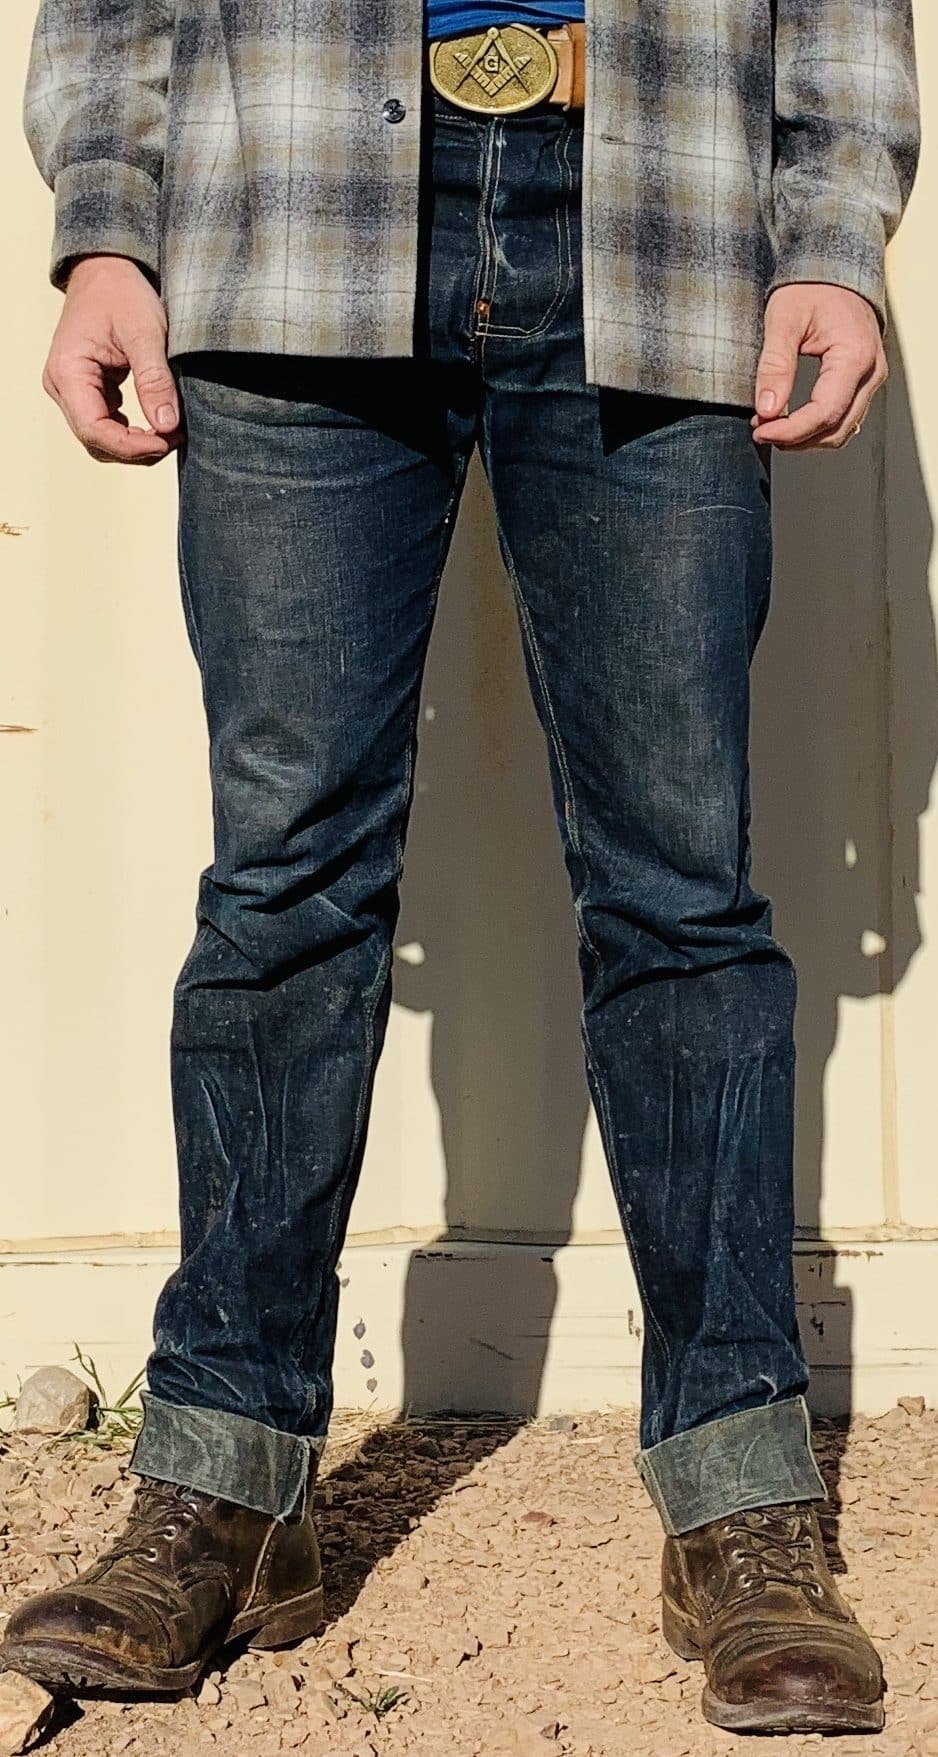 Buying Jeans for Fades? Don't Fall for These Fading Myths! - Denimhunters